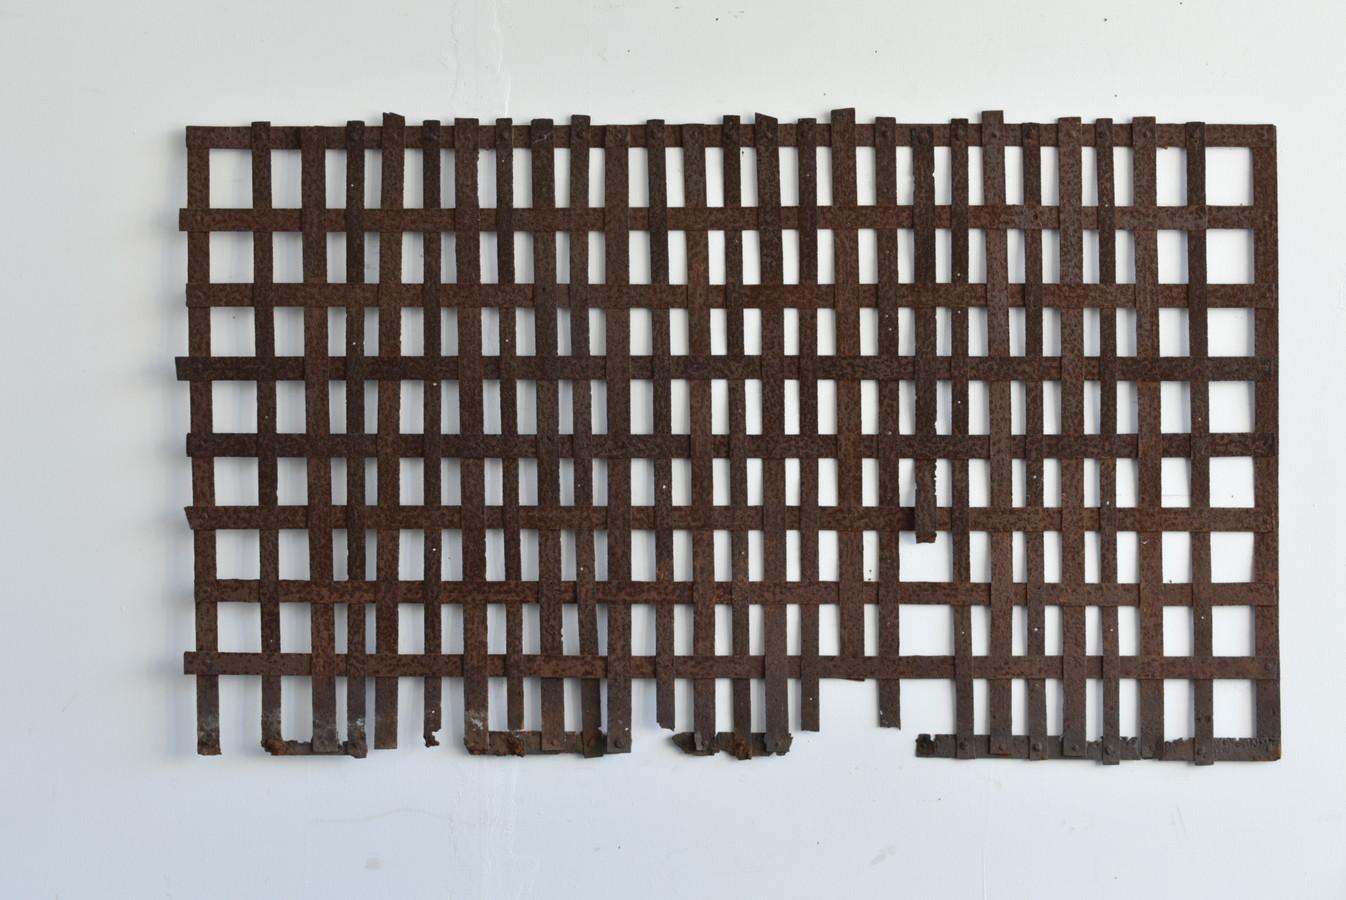 Old Japanese Lattice-Shaped Object Made of Iron Plate / 1868-1940 / Abstract Art 5